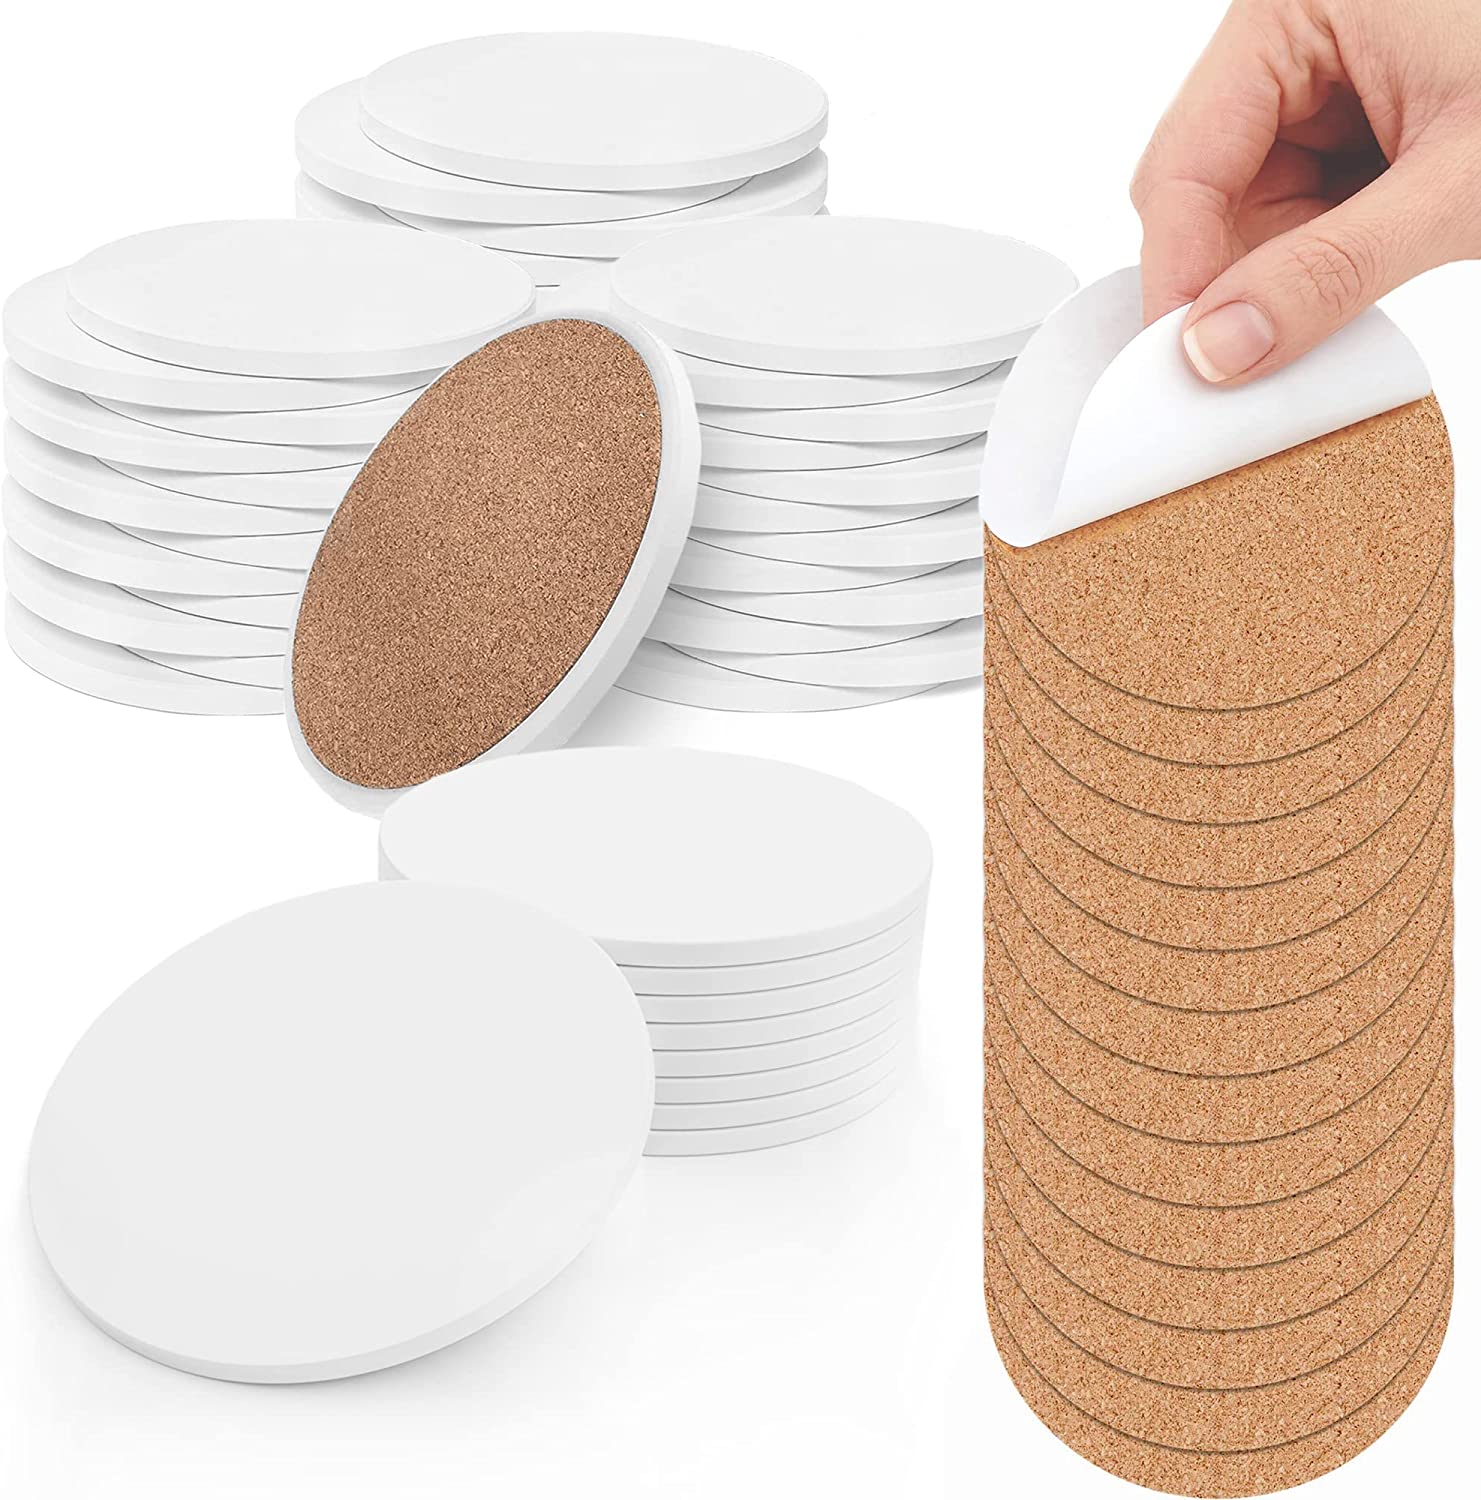 Pixiss Hexagon Ceramic Coasters with Cork Backing - 12